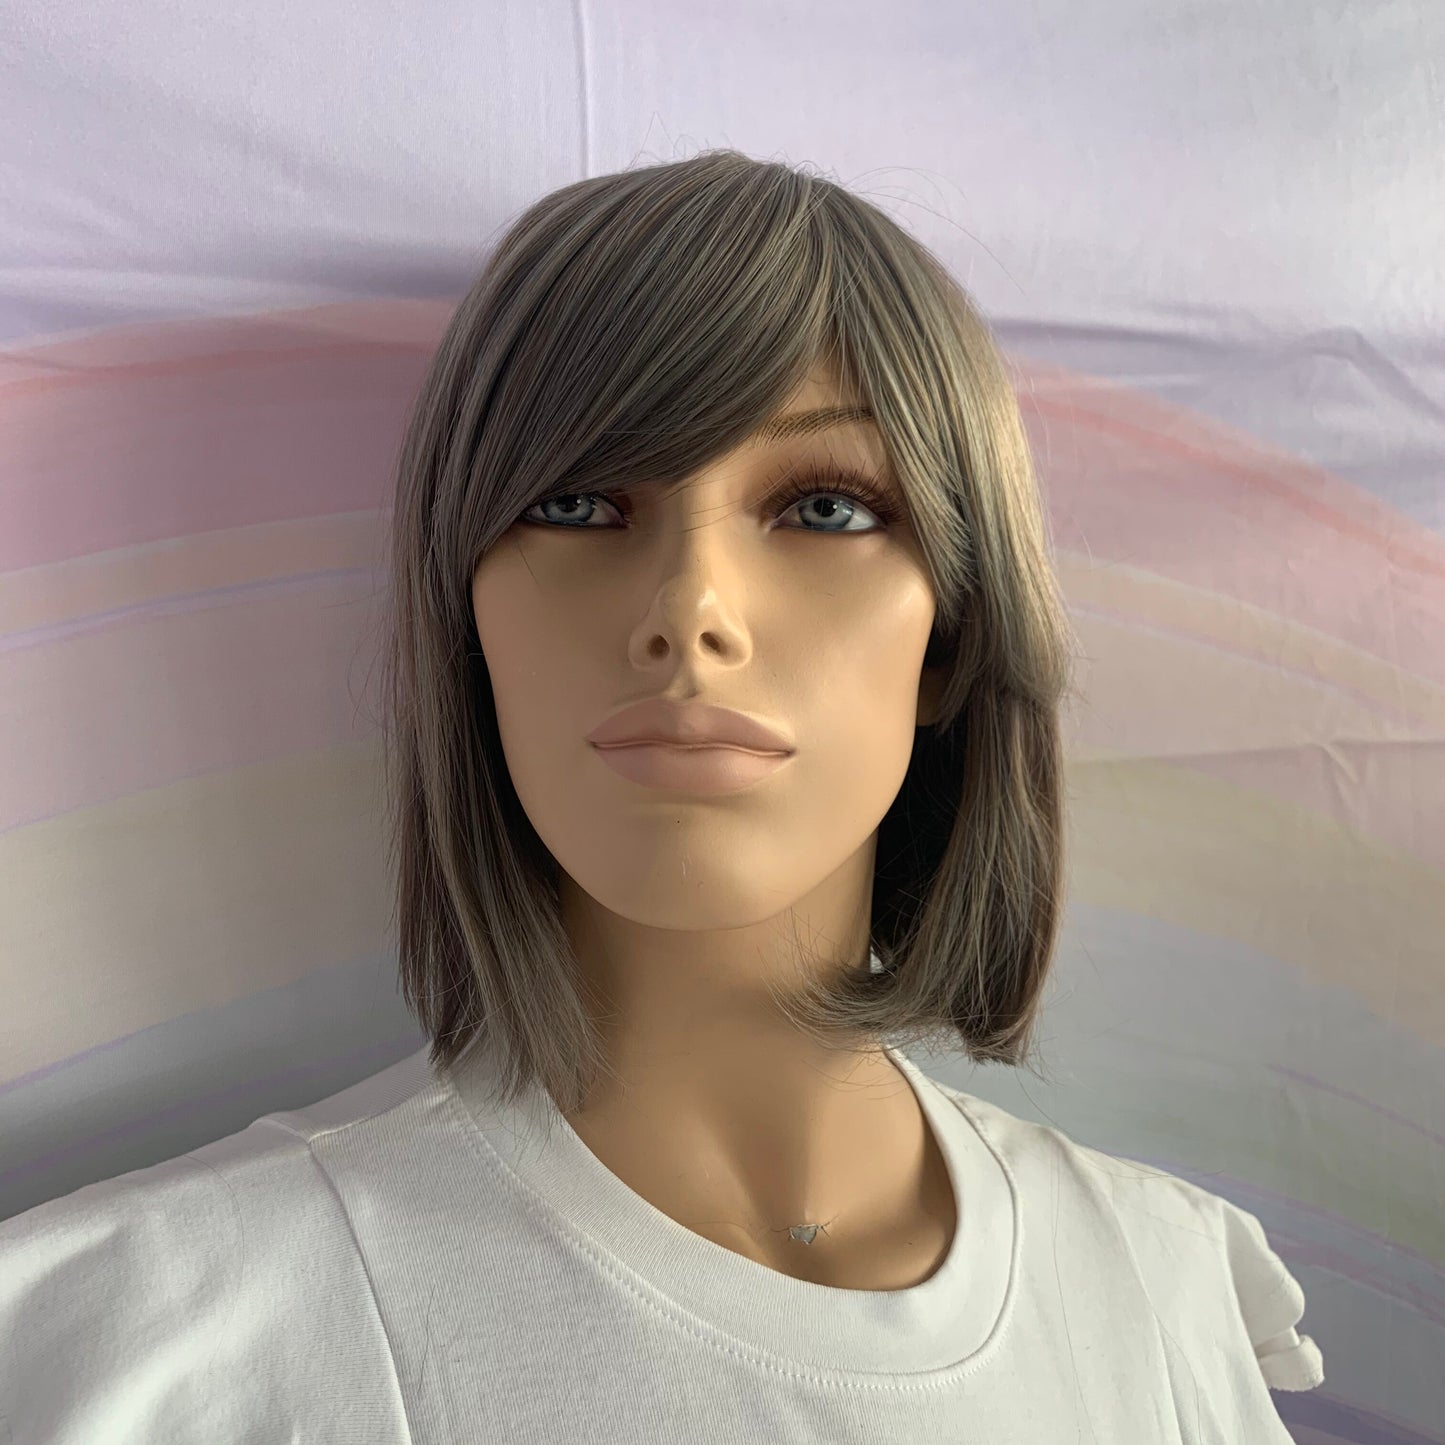 Natural Multi-toned Grey Deluxe Cropped Bob Wig